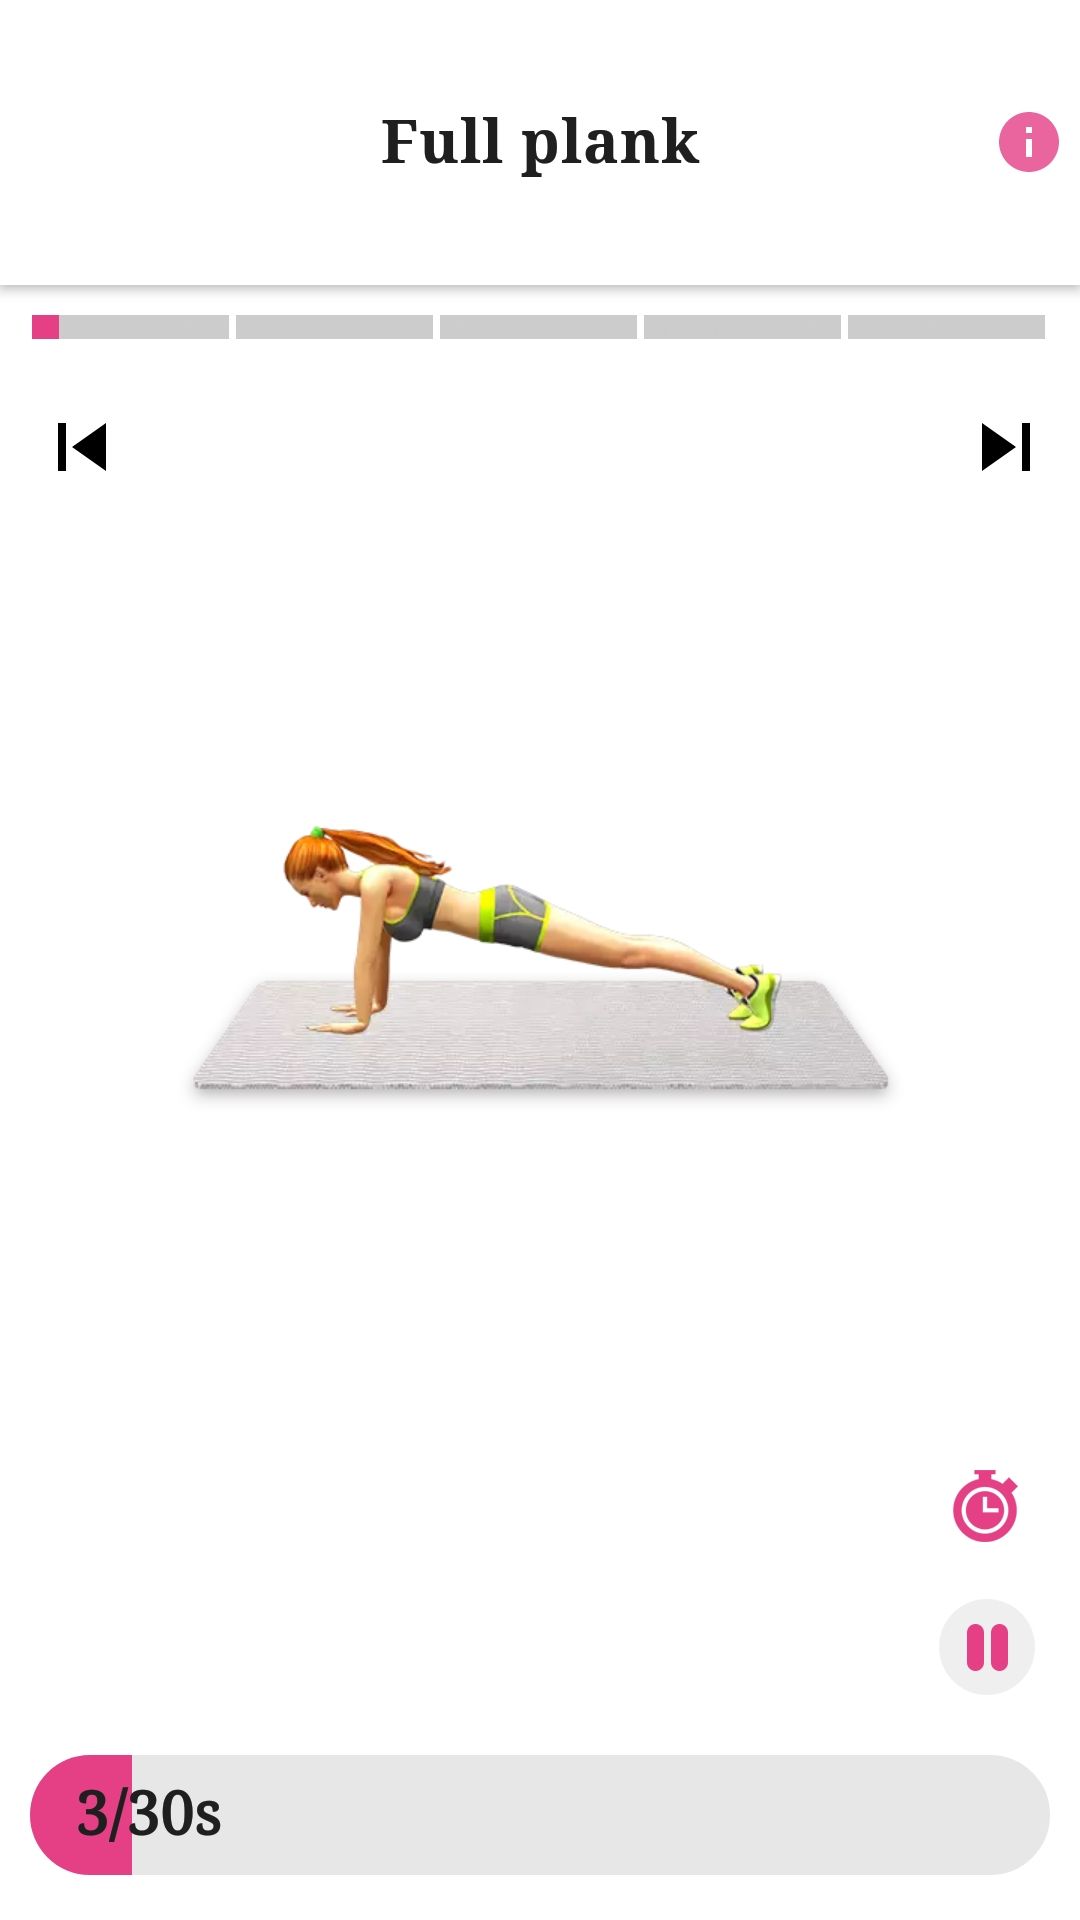 Plank Workout mobile exercise app full plank